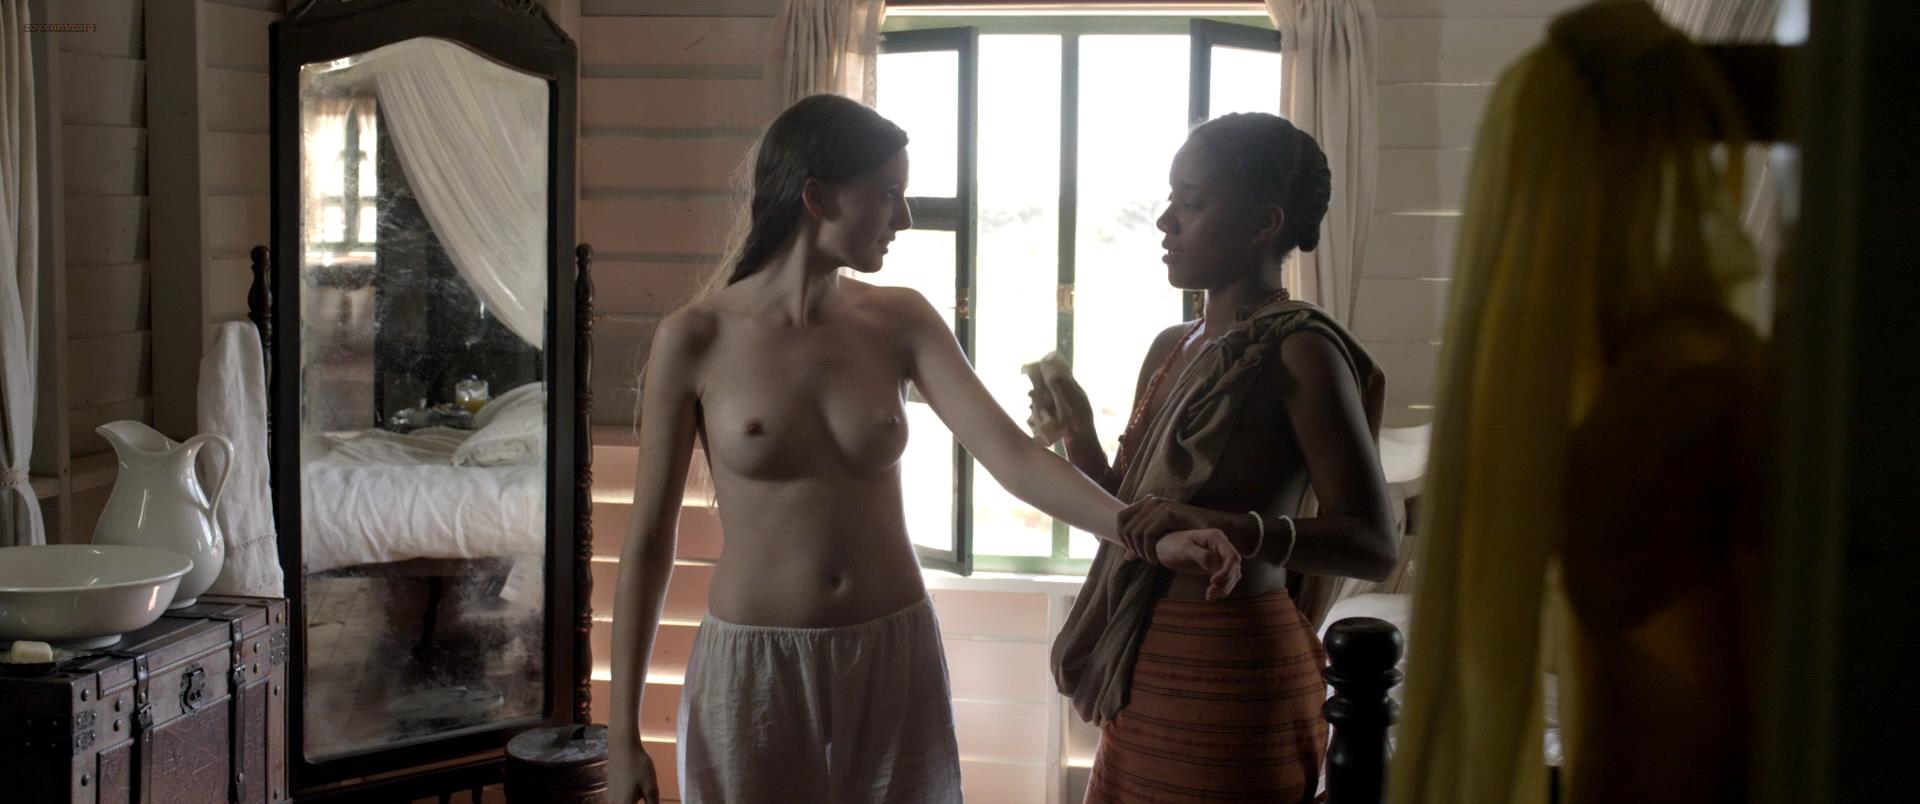 Gaite Jansen nude topless and Yootha Wong Loi Sing nude topless too - Hoe Duur Was De Suiker e1 (2013) hd1080